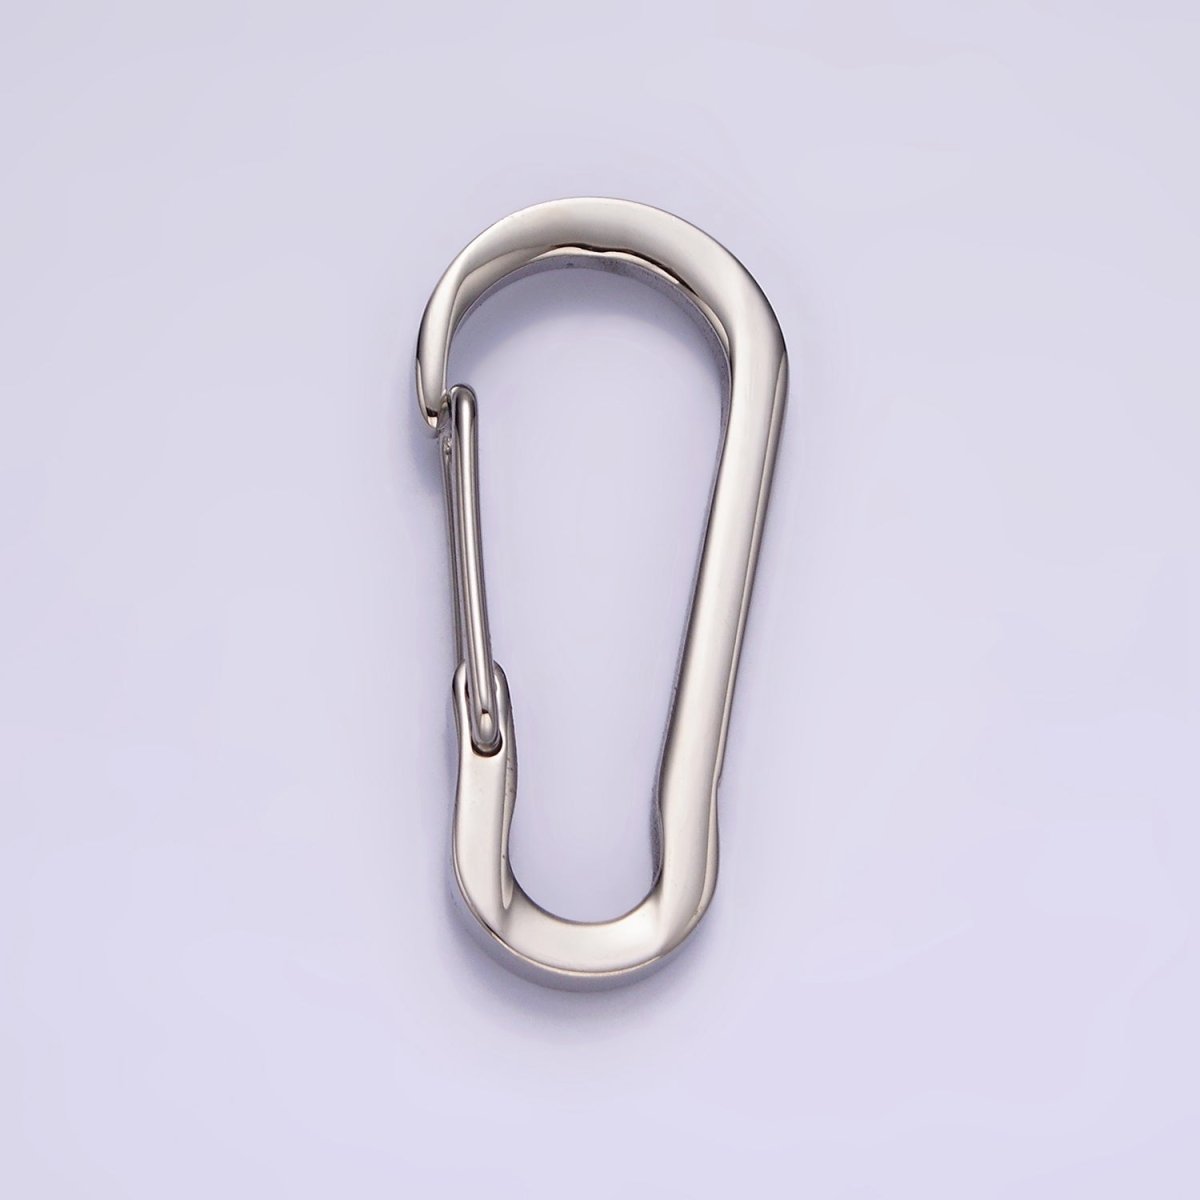 Stainless Steel 35mm, 30mm Curved Oblong Snap Hook Carabiner Findings Supply | Z557 Z558 - DLUXCA